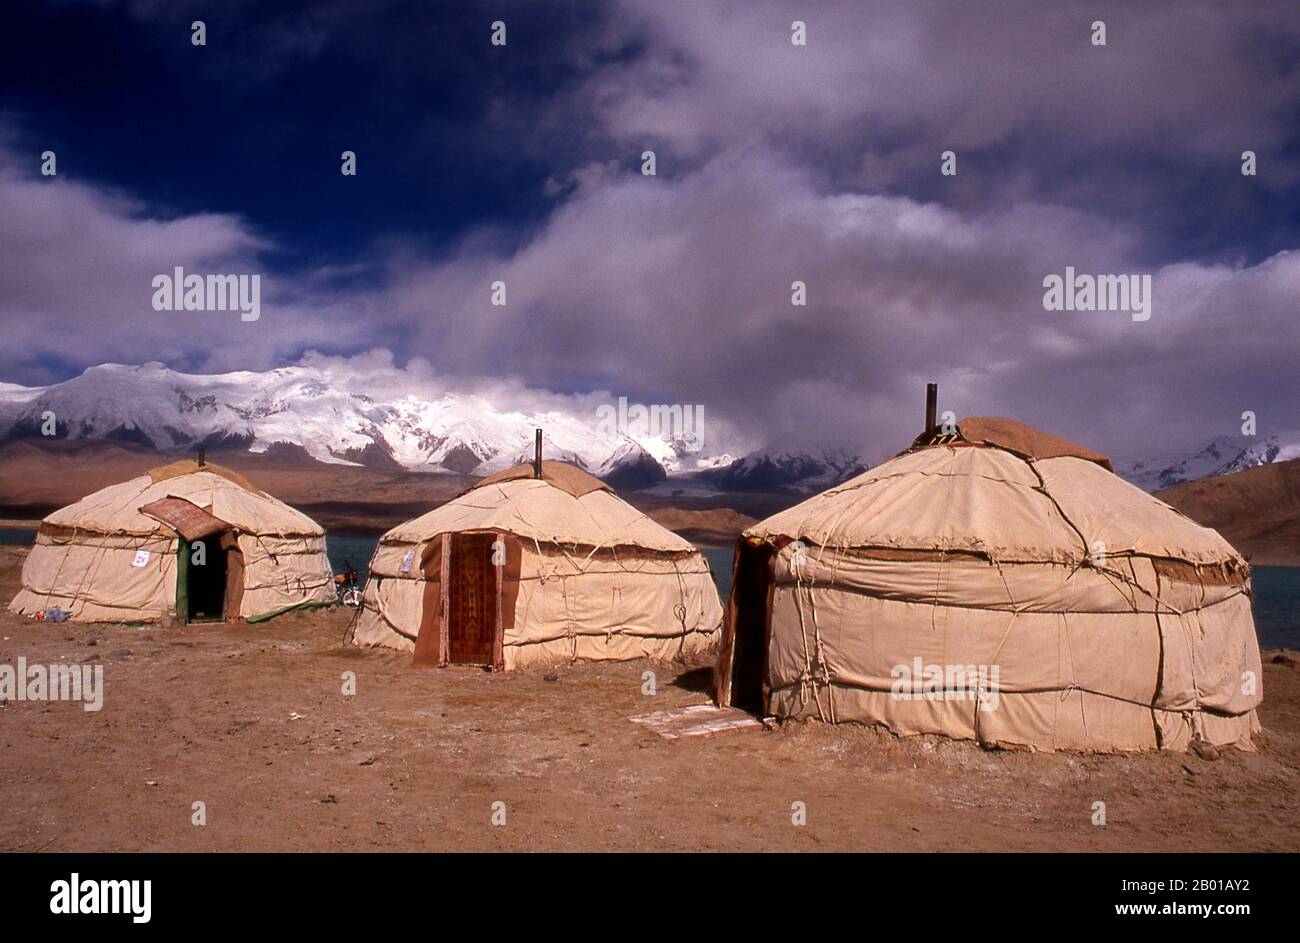 China: Kirghiz yurts at Lake Karakul on the Karakoram Highway, Xinjiang.  Two small settlements of Kirghiz (Kyrgyz or Kirgiz) nomads lie by the side of Lake Karakul high up in the Pamir Mountains. Visitors can stay overnight in one of their mobile homes or yurts – Kirghiz men will approach travellers as they arrive at the lake and offer to arrange this accommodation. The Kyrgyz form one of the 56 ethnic groups officially recognized by the People's Republic of China. There are more than 145,000 Kyrgyz in China.  The Zhongba Gonglu or Karakoram Highway is an engineering marvel. Stock Photo